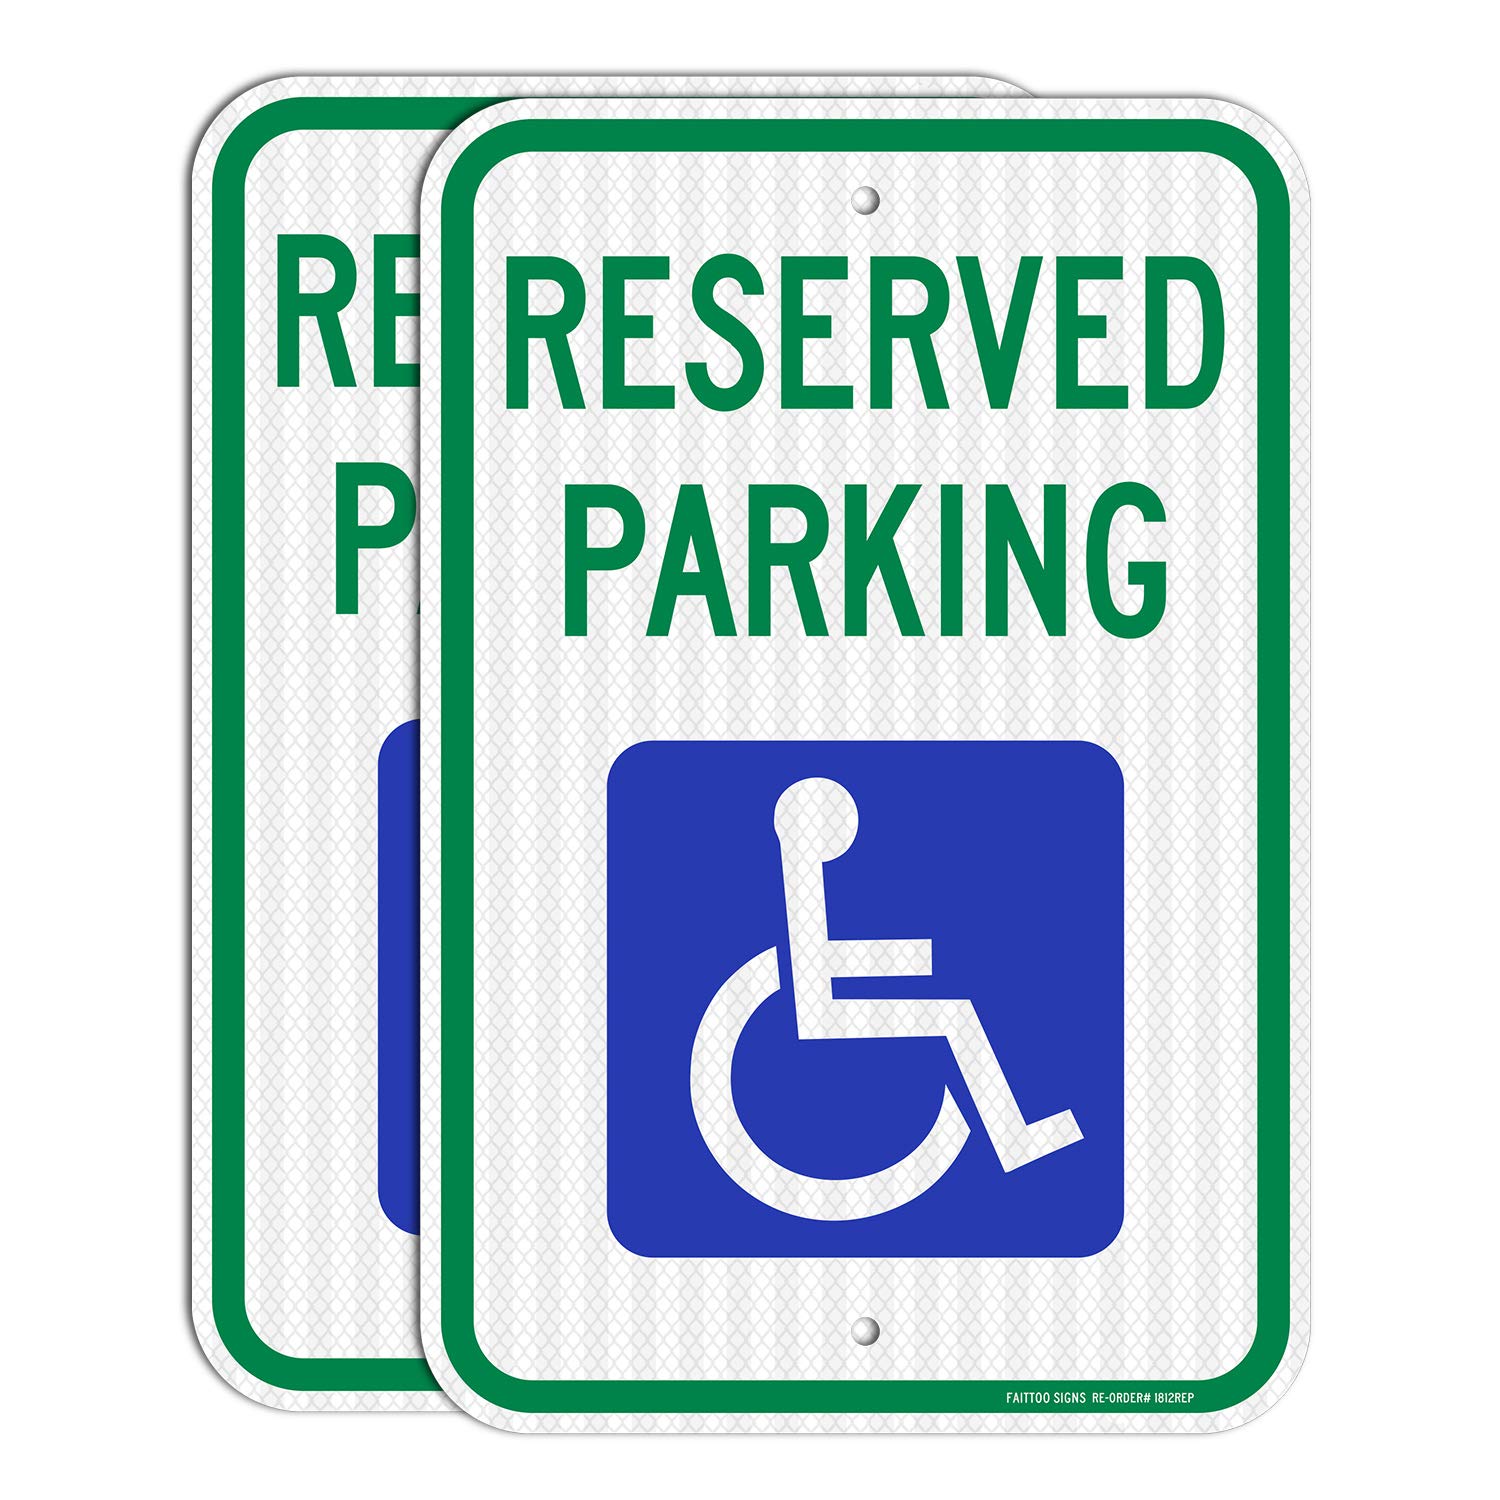 (2 Pack) Reserved Parking Sign, Handicap Parking Sign, with Picture of Wheelchair Sign, 18 x 12 Engineer Grade Reflective Sheeting Rust Free Aluminum, Weather Resistant, Waterproof, Durable Ink